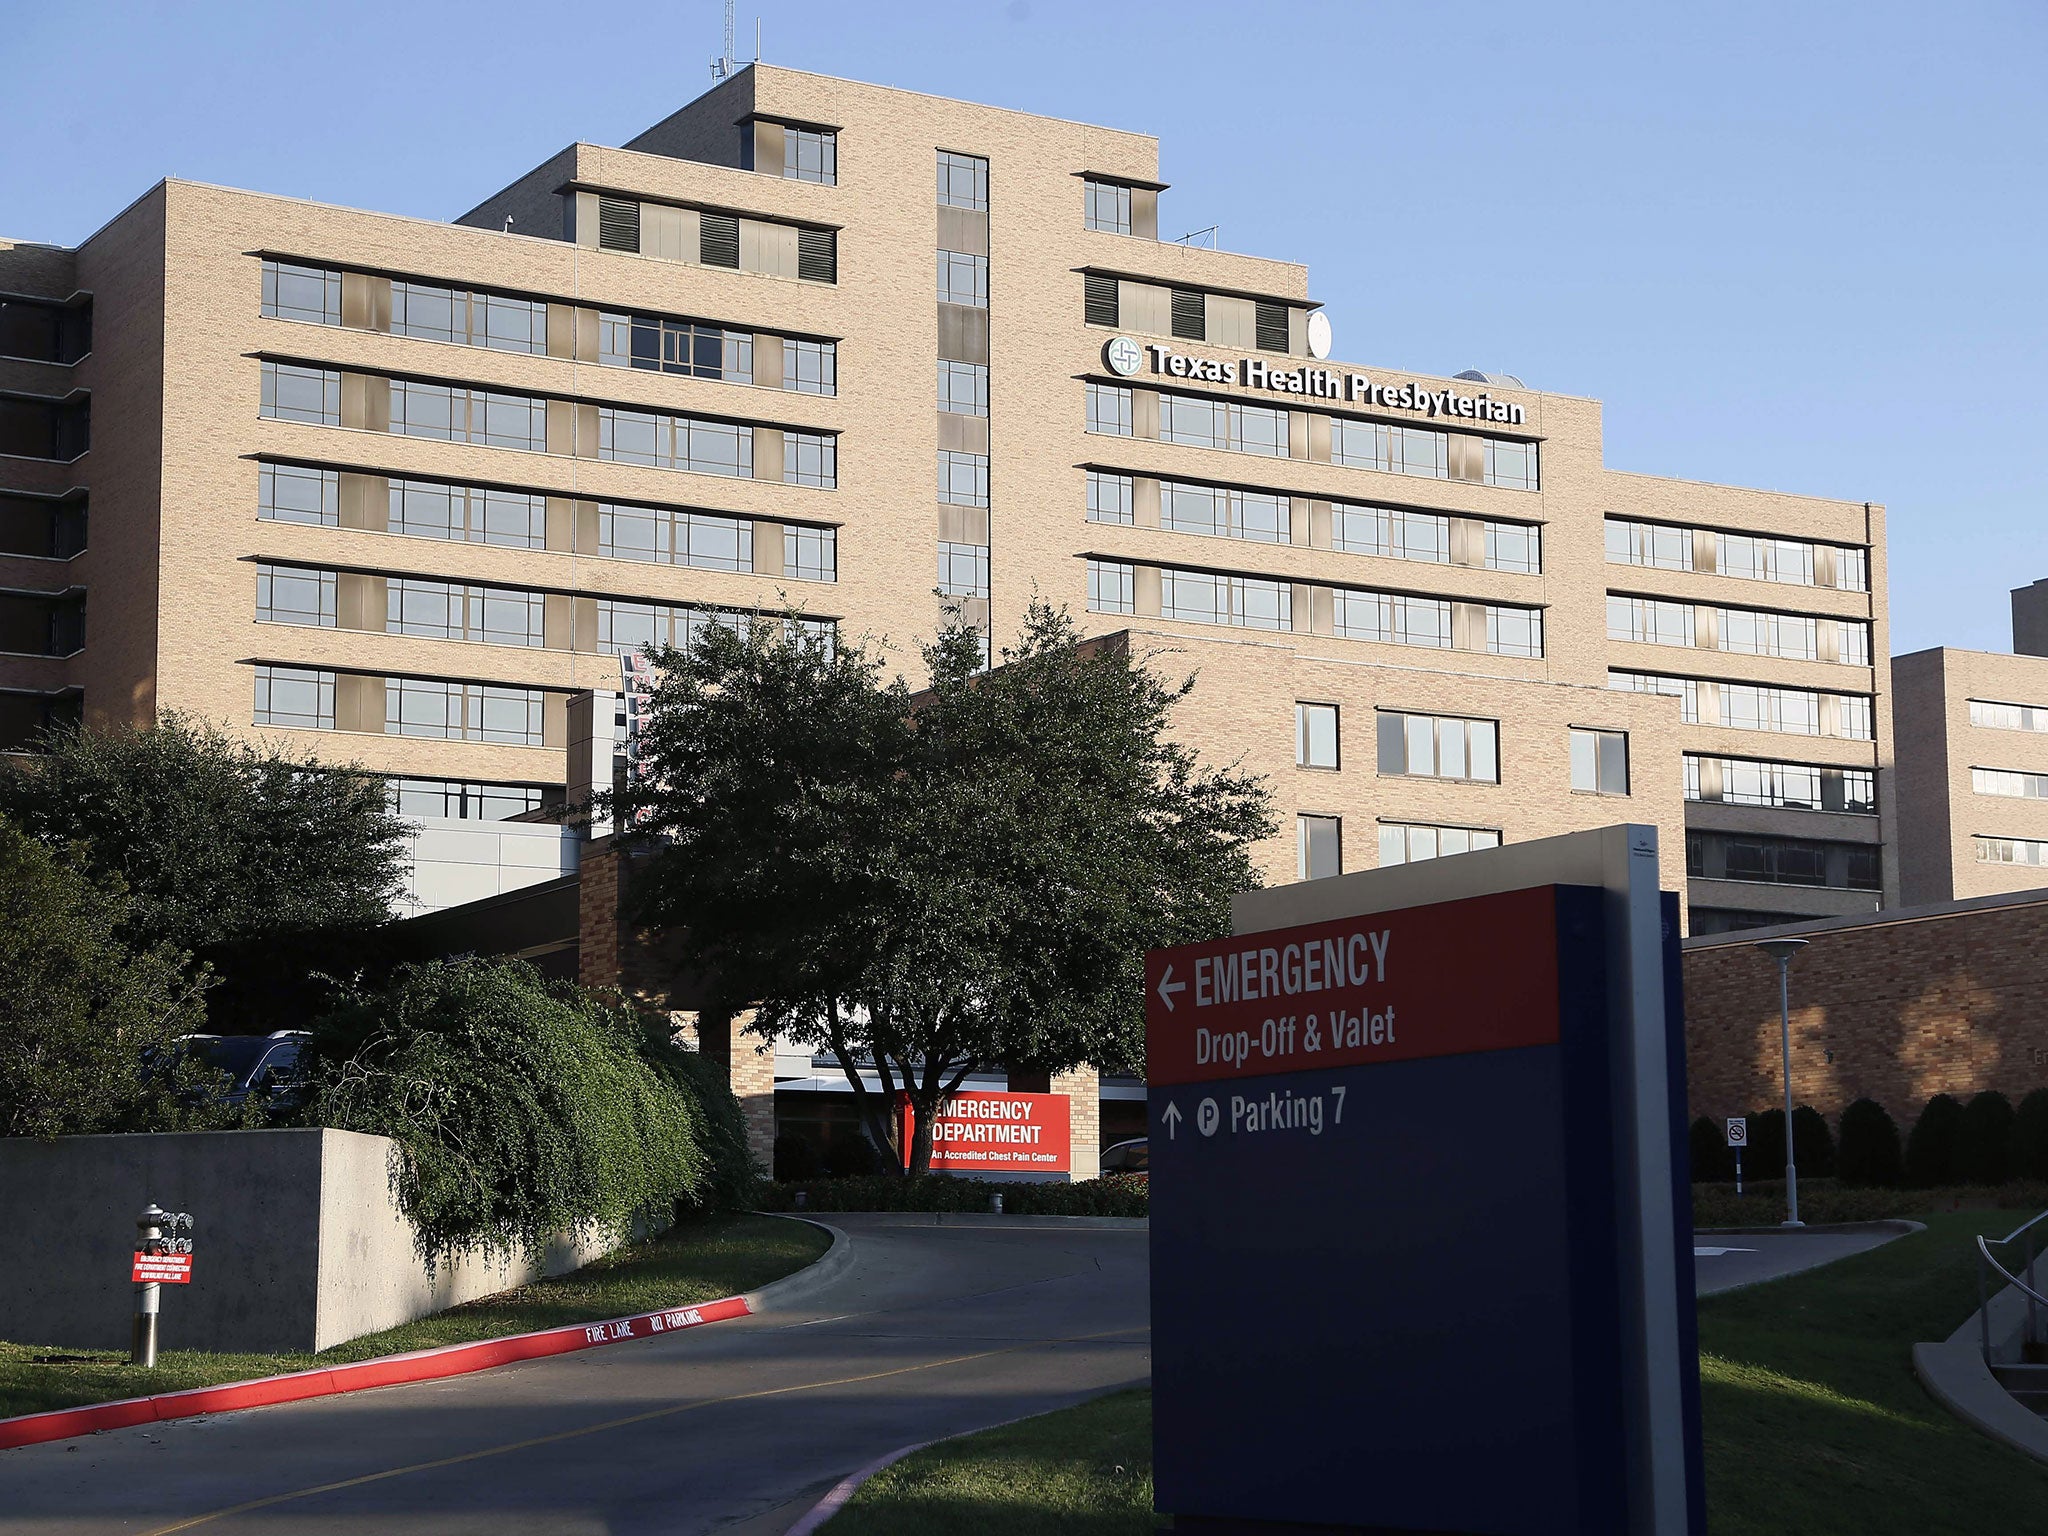 Miss Vinson and another nurse caught Ebola from a patient at Texas Health Presbyterian Hospital